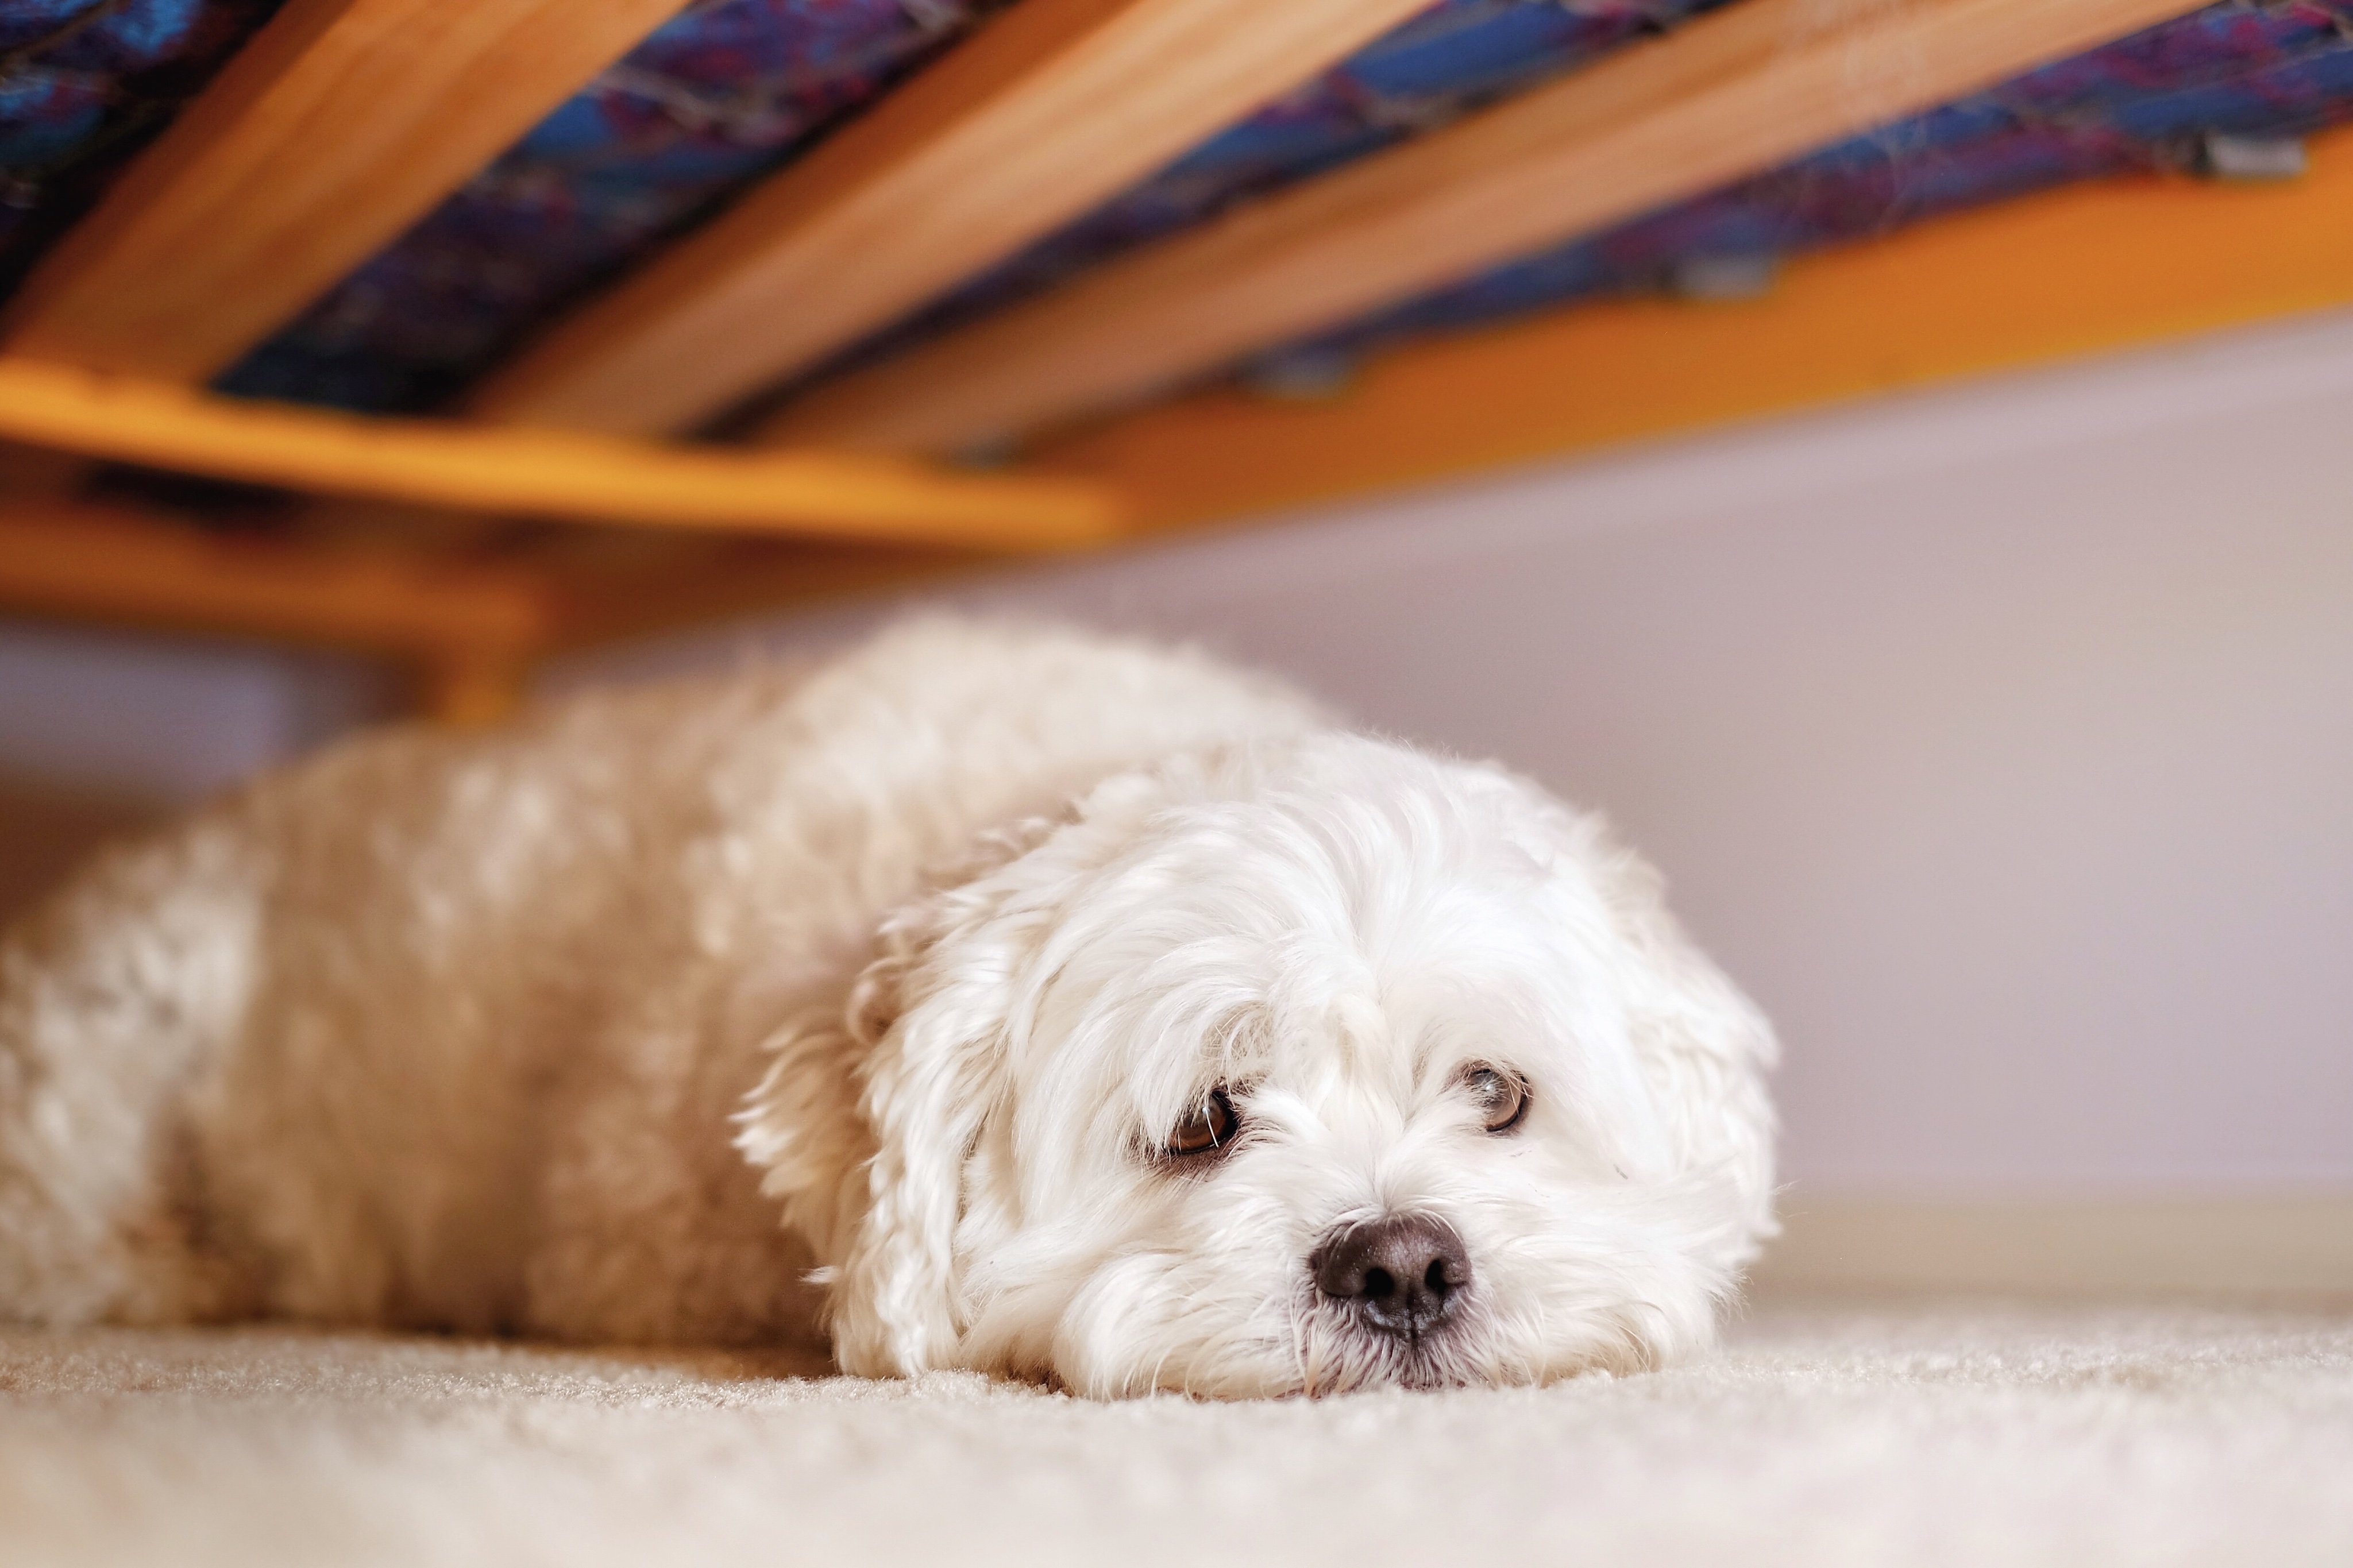 Samantha spotted the little puppy under Julia’s bed. | Source: Getty Images